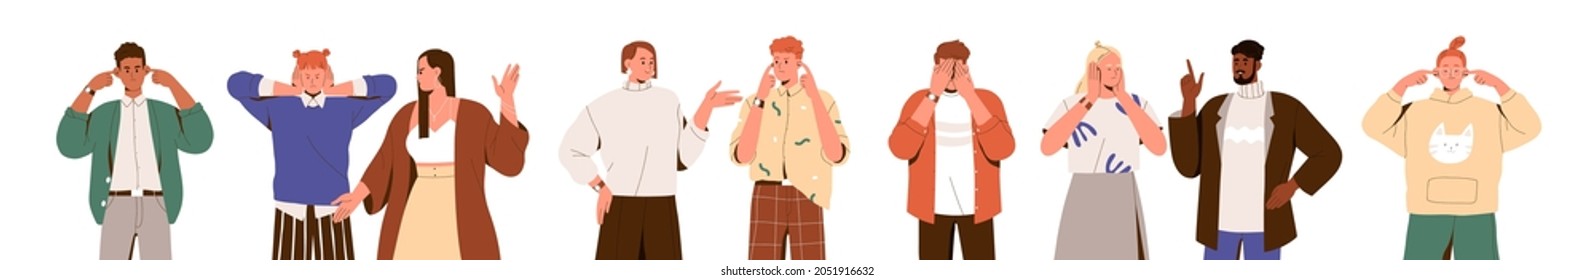 People closing and plugging ears with hands and fingers, ignoring annoying sounds and noise. Sensitive characters avoiding hearing and listening set. Flat graphic vector illustration isolated on white